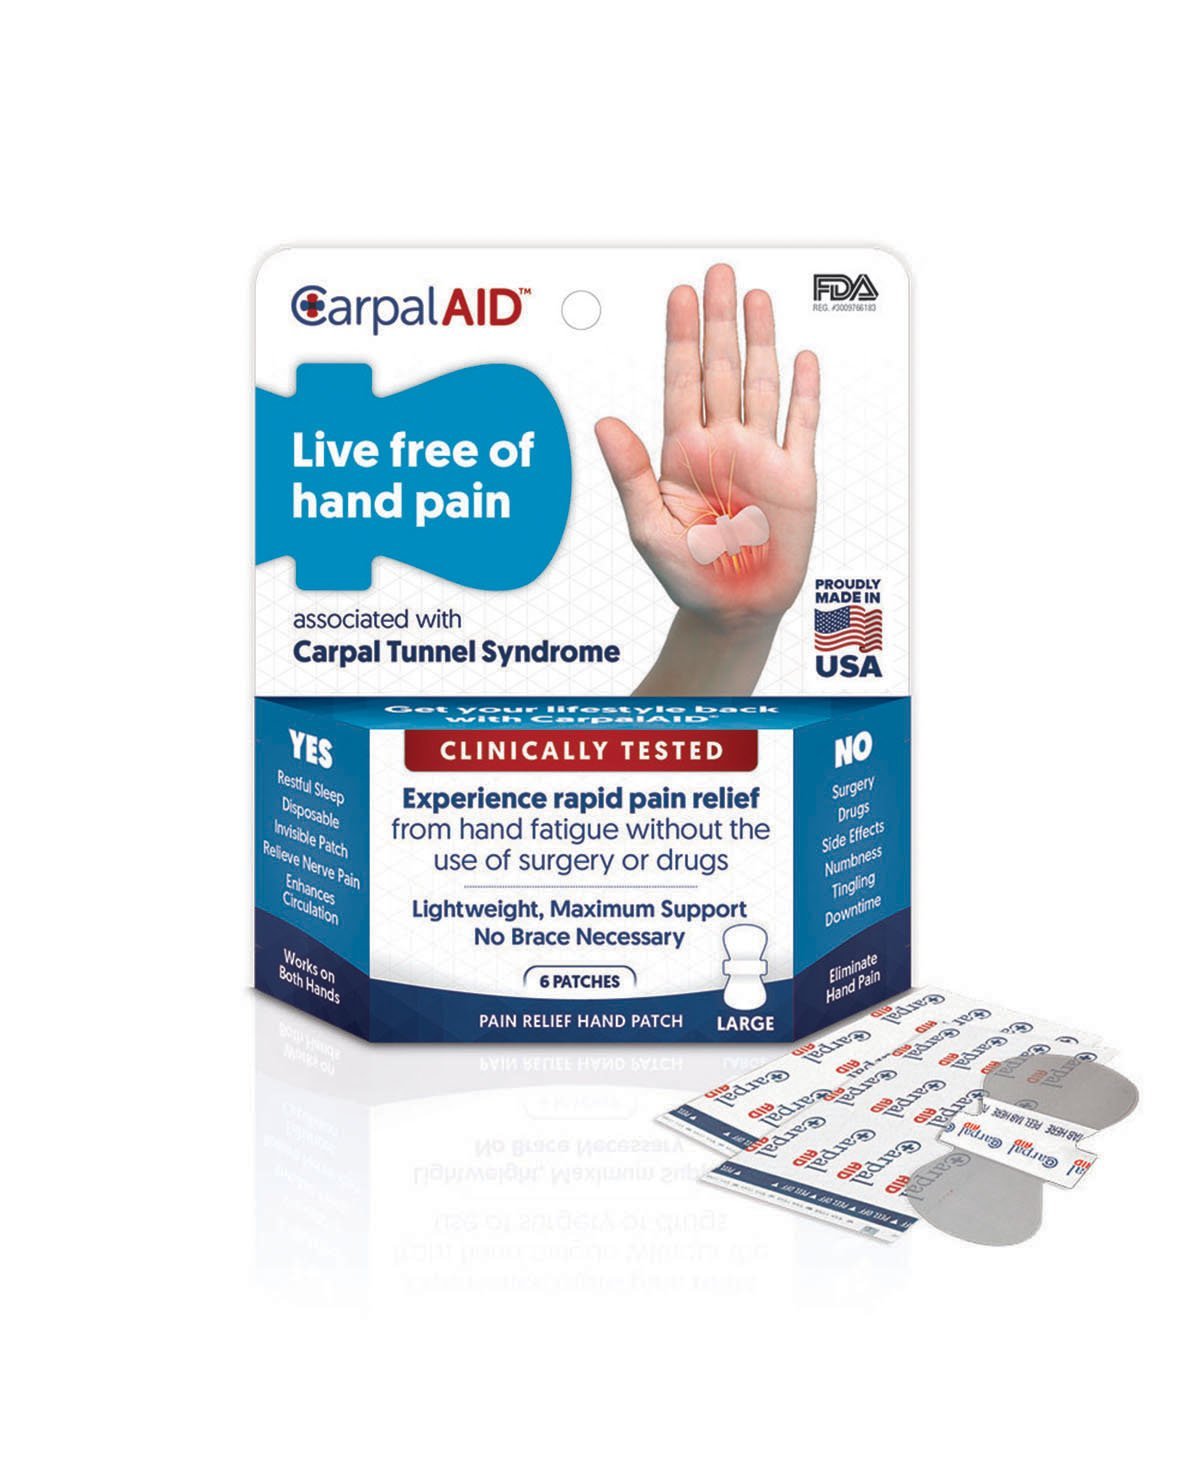 Carpal AID, Functional Support for Carpal Tunnel Syndrome - Best Carpal Tunnel Brace for Ultimate Relief, Count 6 - Size Large